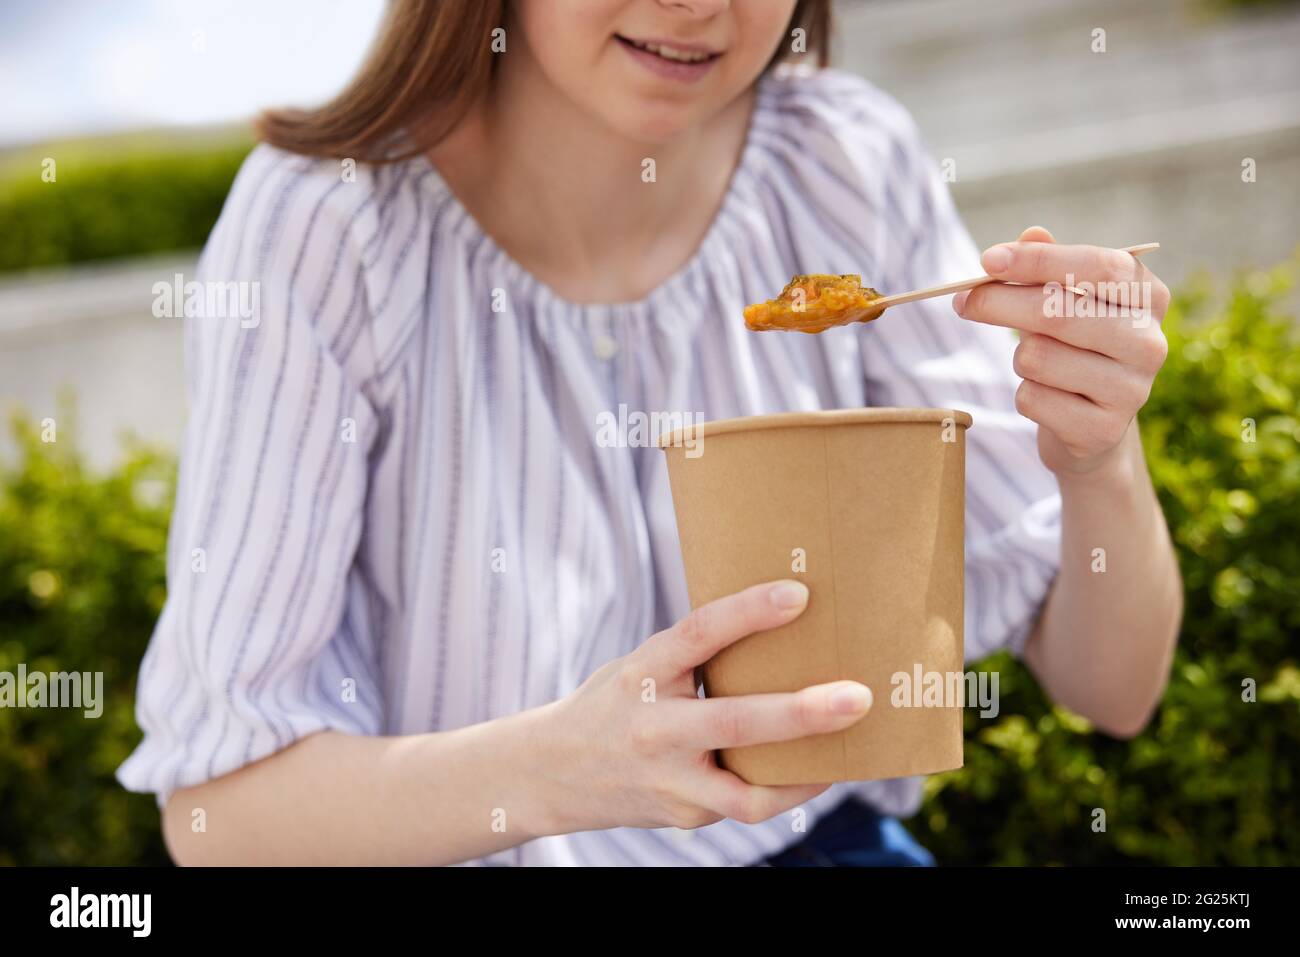 Close Up Of Woman Eating Healthy Vegan Or Vegetarian Soup As Takeaway Lunch From Recyclable Packaging With Wooden Spoon Stock Photo